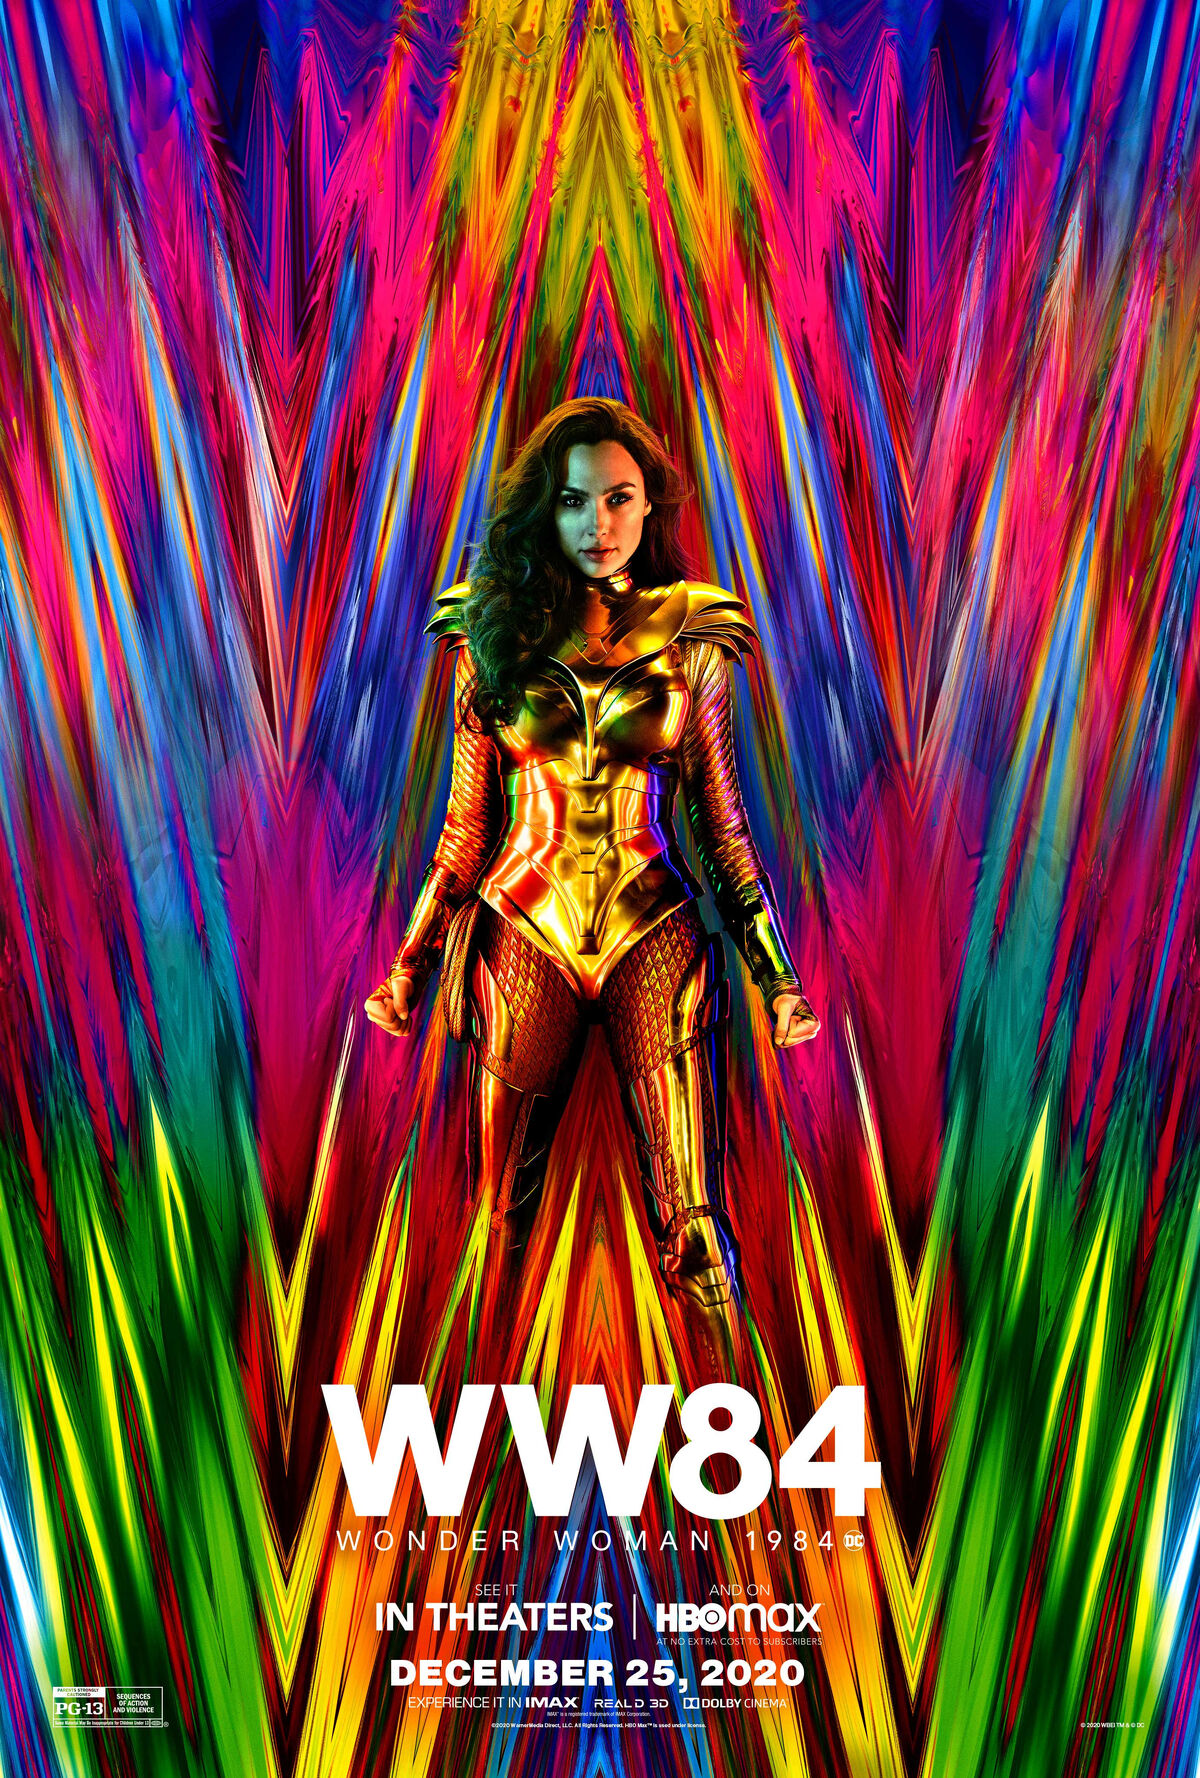 Wonder Woman's Armor, DC Extended Universe Wiki